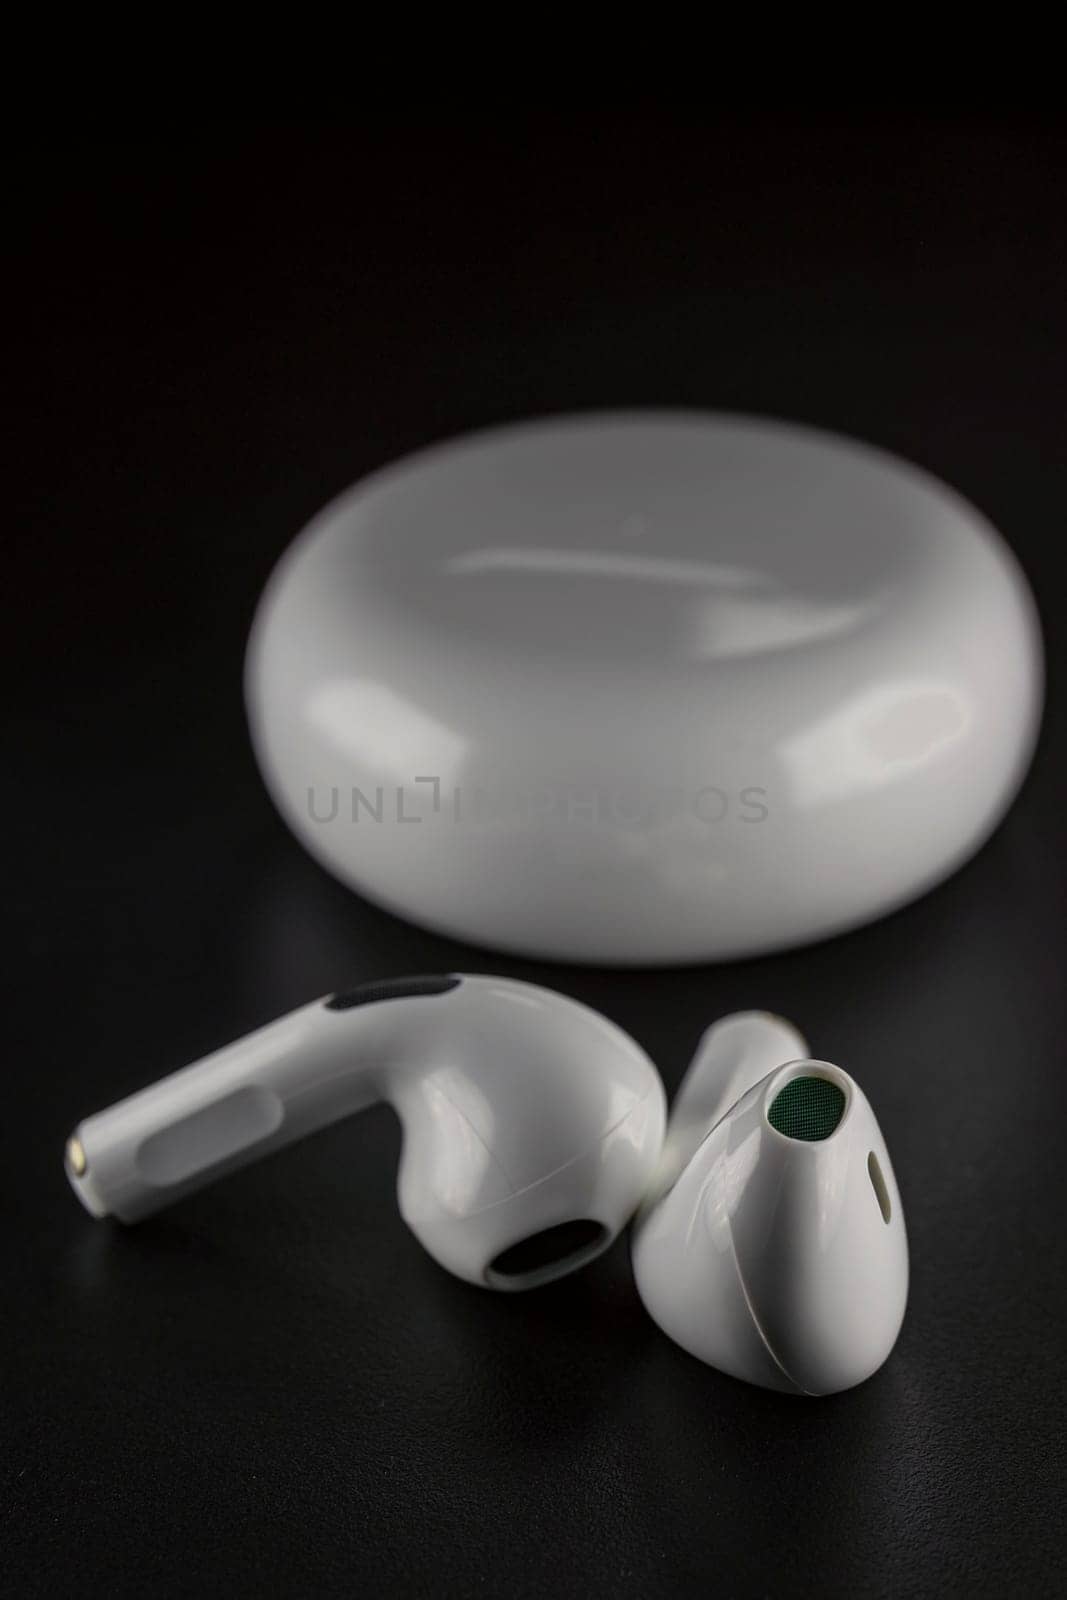 ROSTOV-ON-DON, RUSSIA - APRIL 28, 2018: Apple AirPods wireless Bluetooth headphones and charging case for Apple iPhone. New Apple Earpods Airpods in box. by zokov